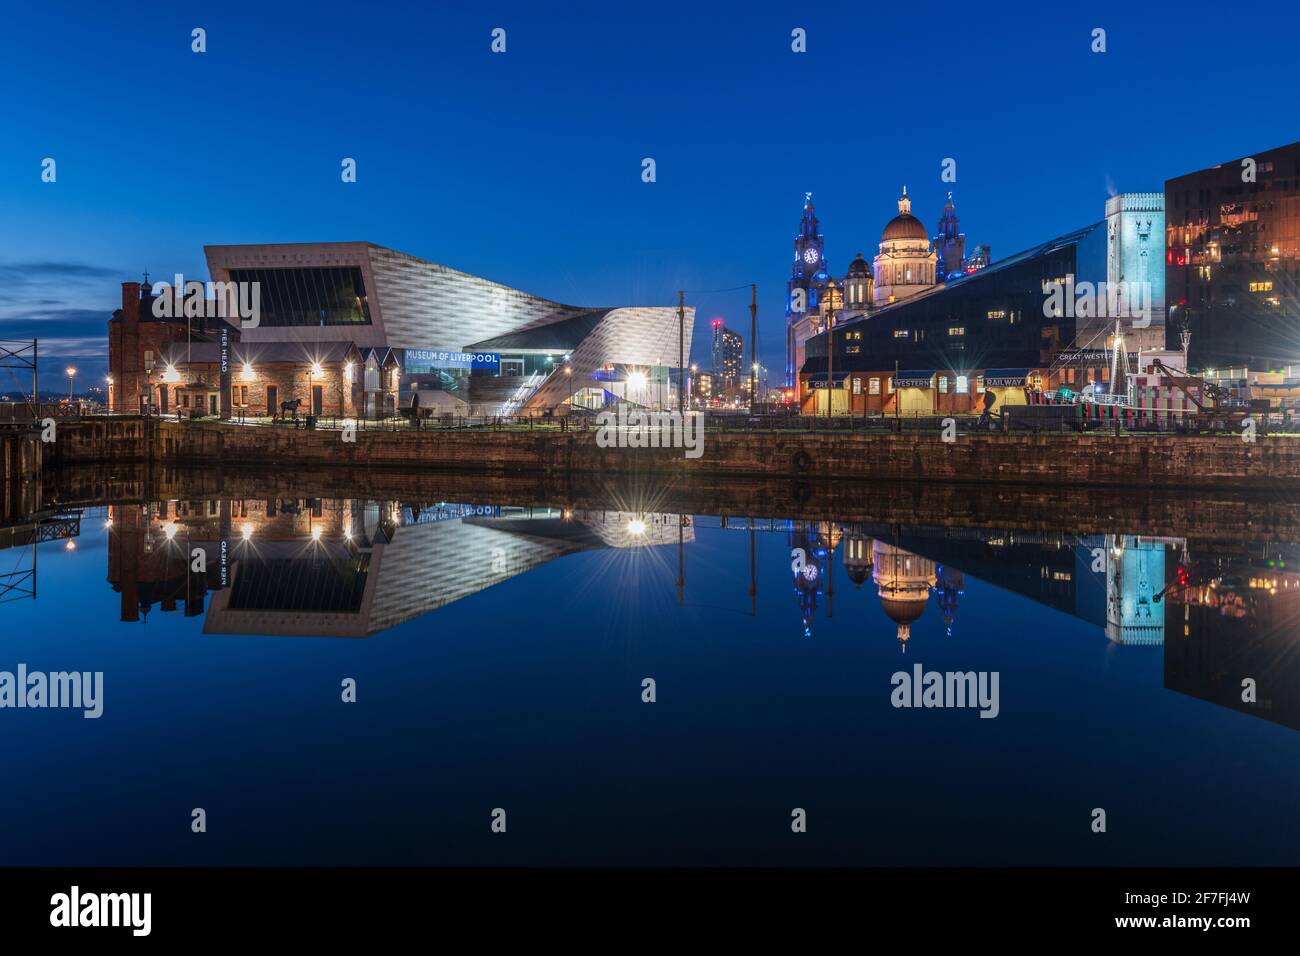 Reflected view of The Museum of Liverpool, Liverpool, Merseyside, England, United Kingdom, Europe Stock Photo